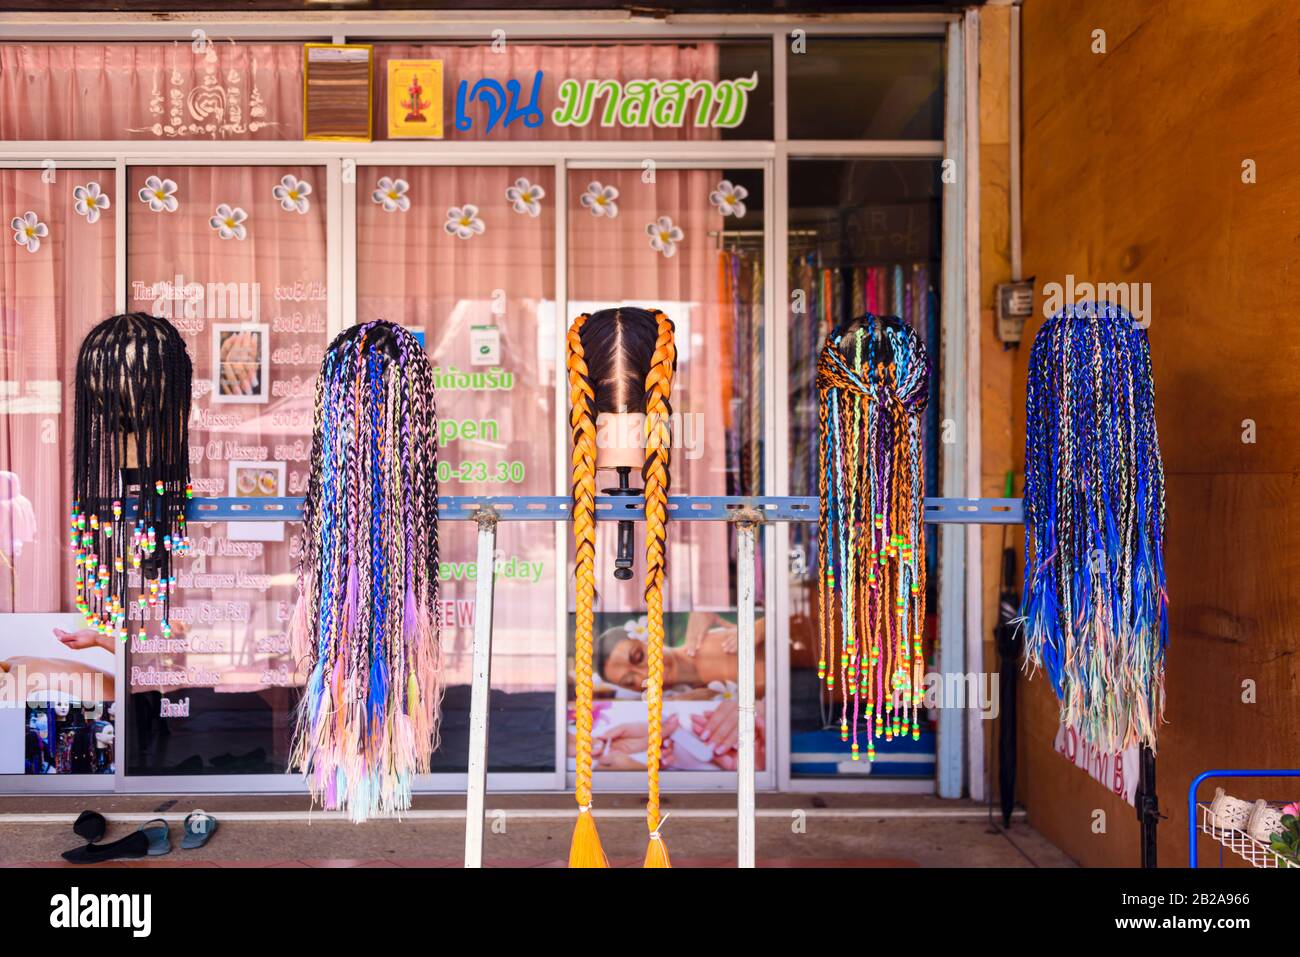 Five heads outside a hairdressers showing hair braids, Thailand. Stock Photo